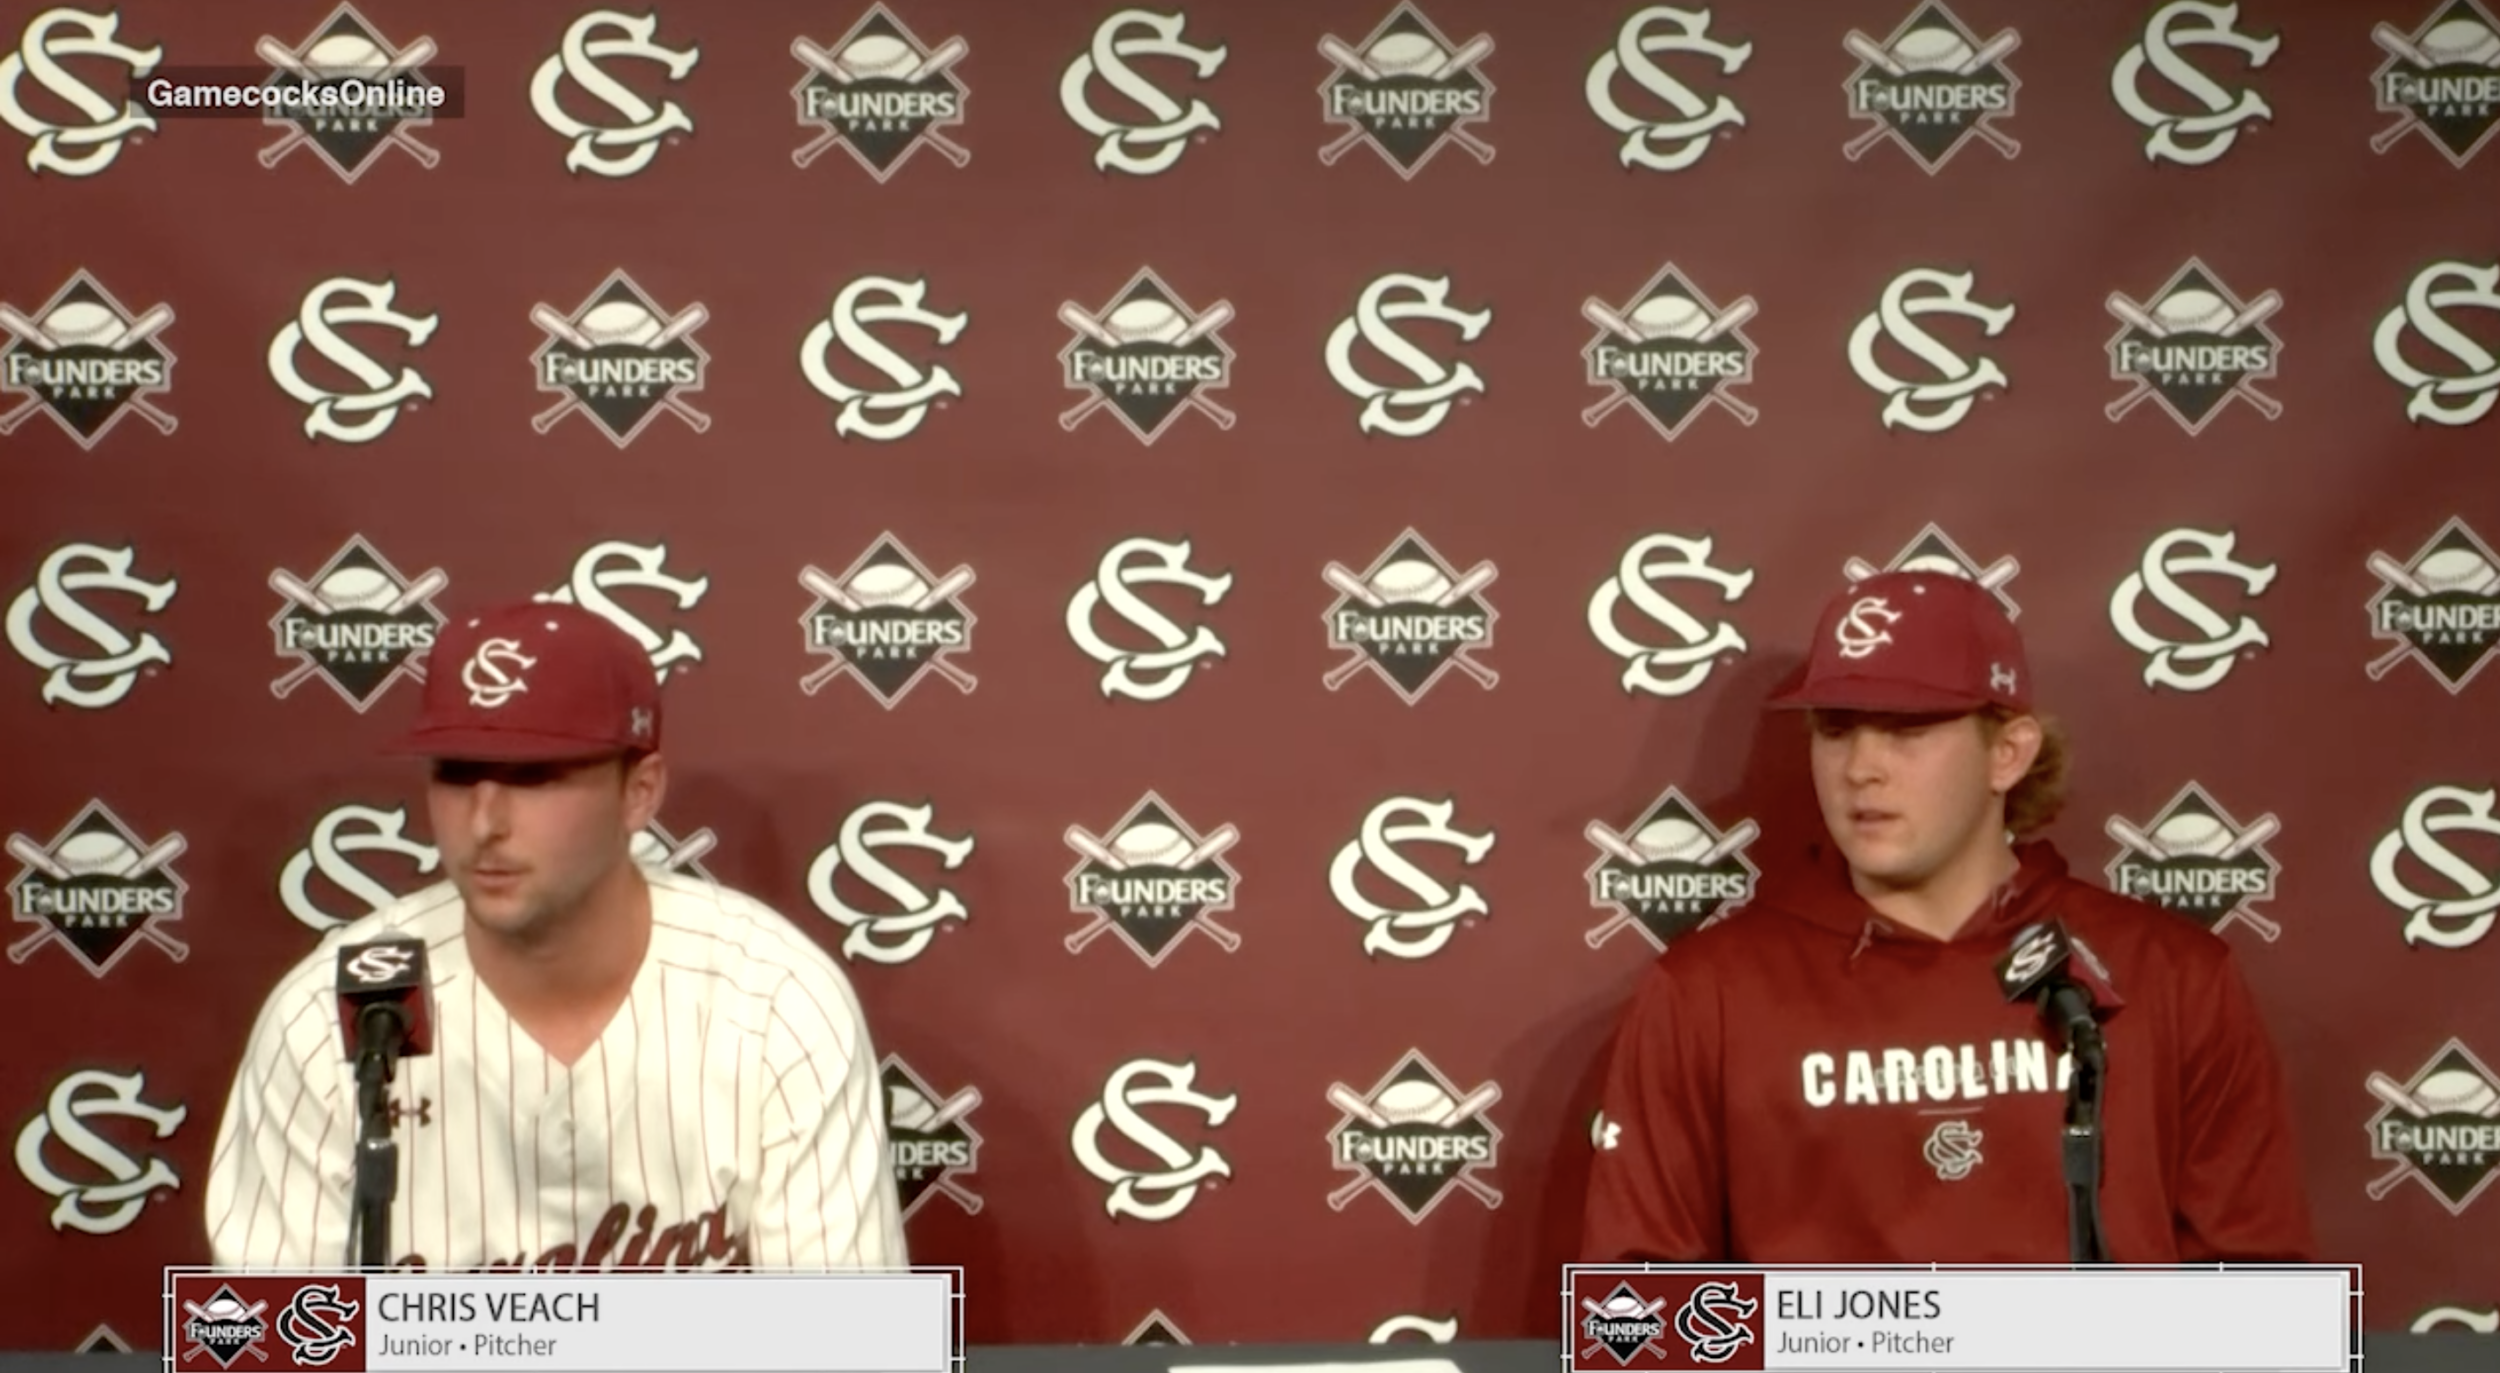 BSBL PostGame News Conference: Chris Veach and Eli Jones - (Miami of Ohio)